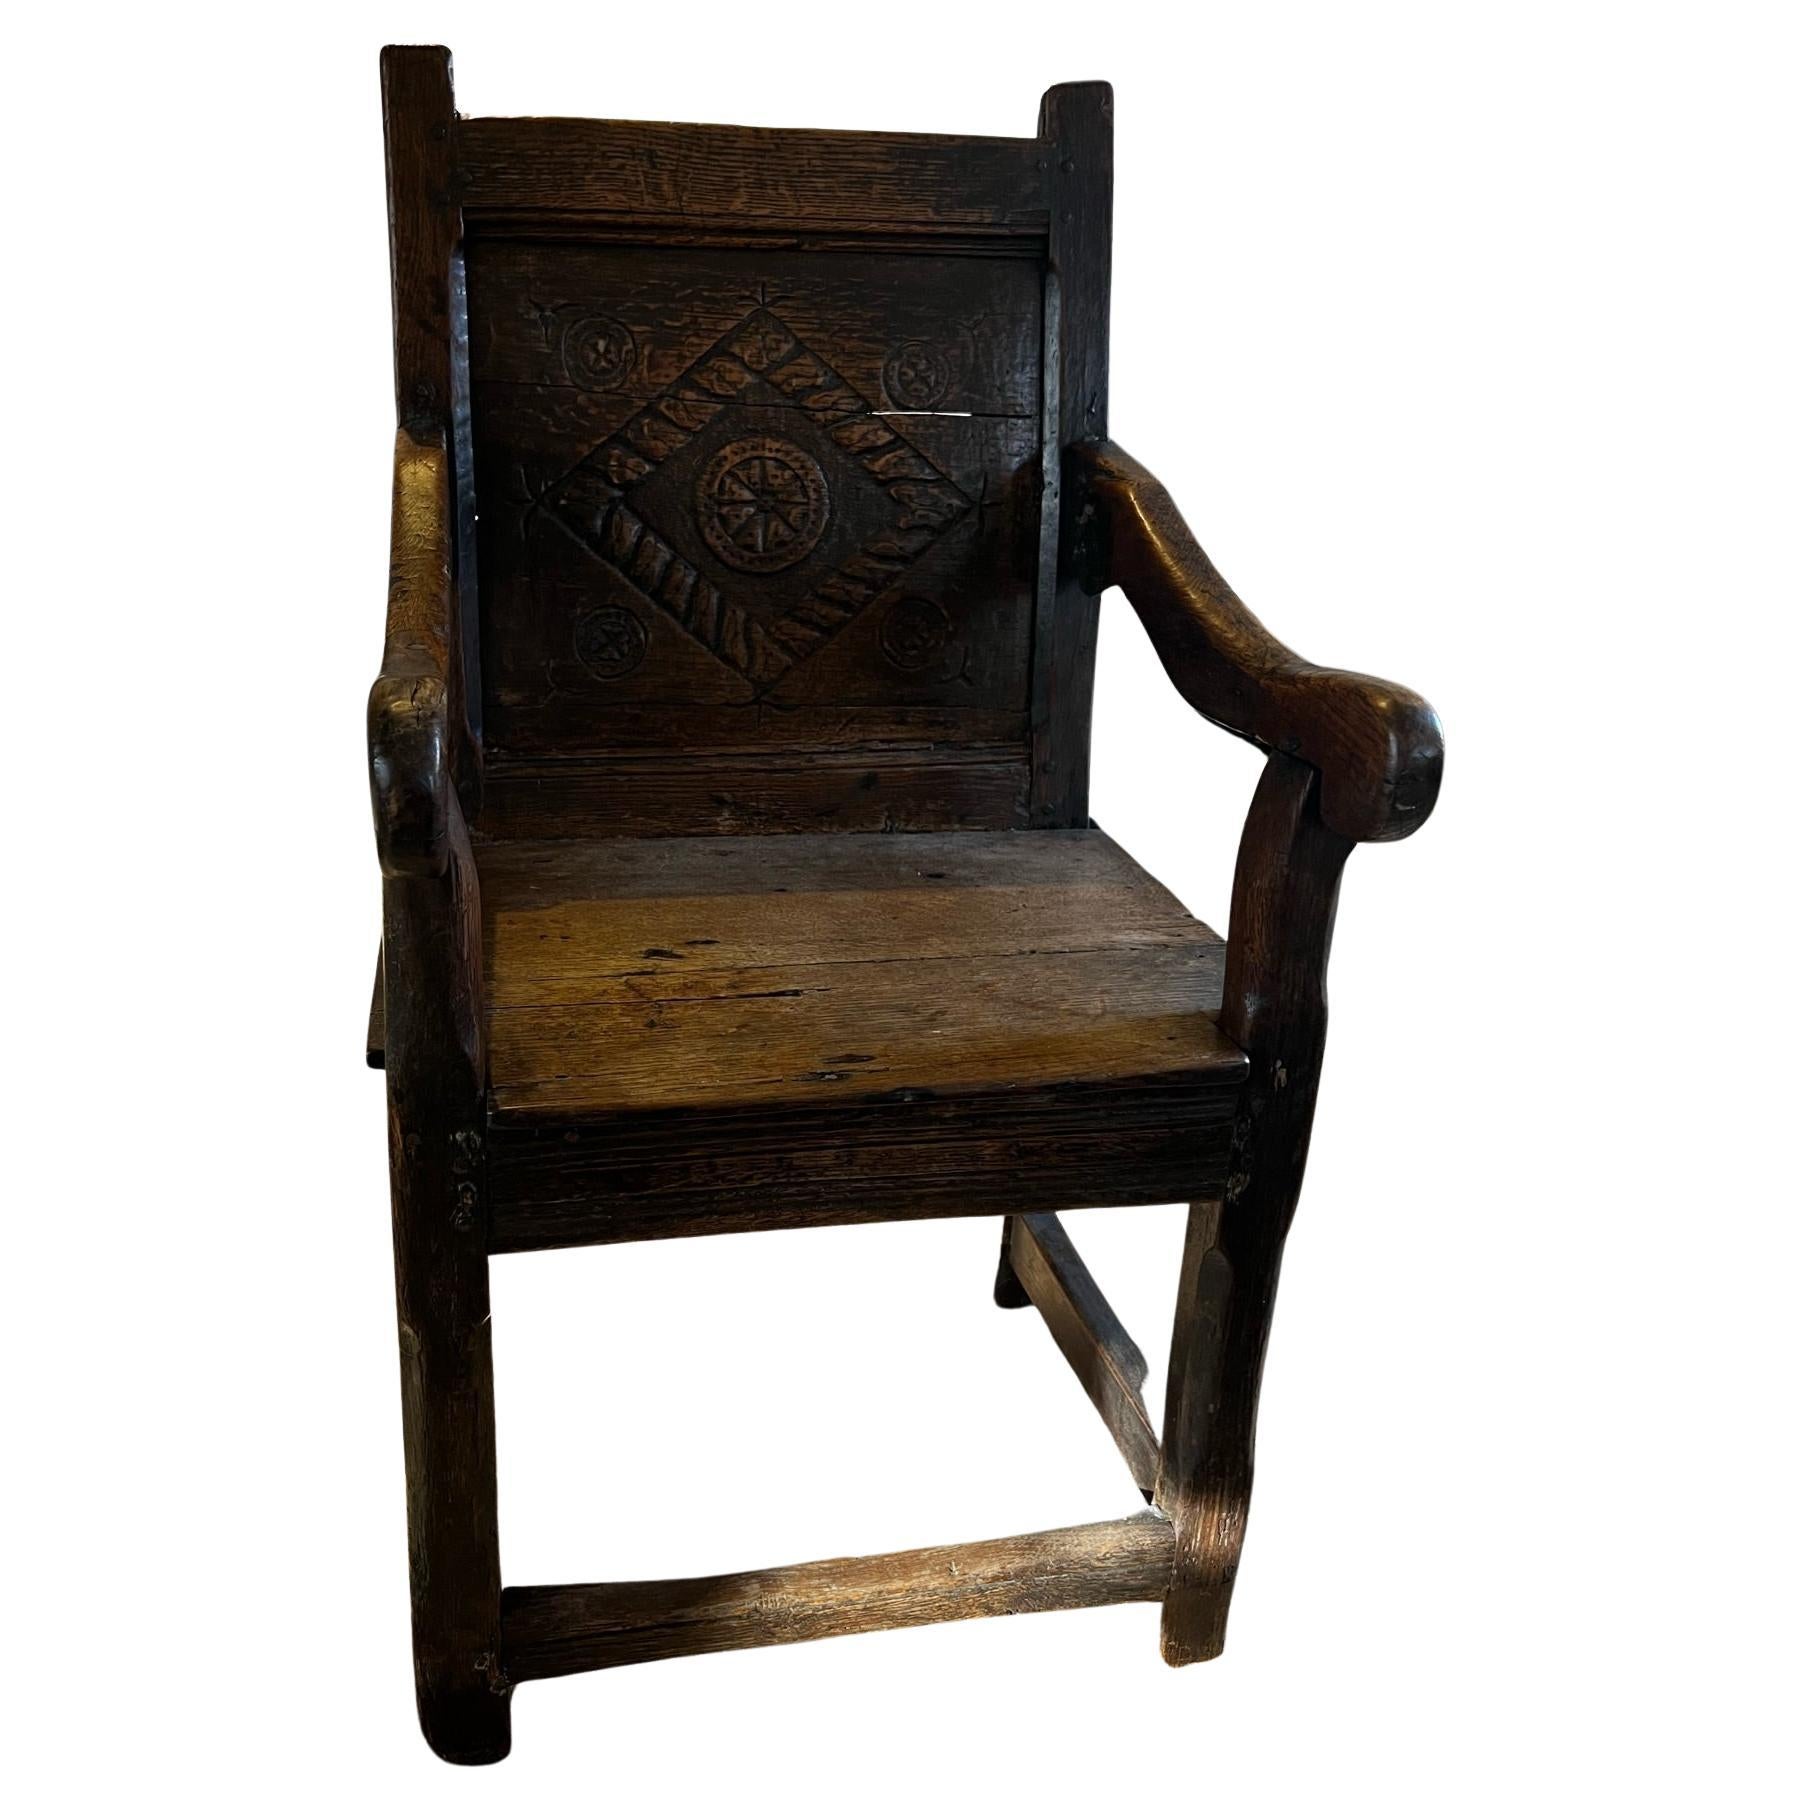 This gorgeous Elizabethan chair would be an asset to any space with its simple and modern shape and carved details its spectacular!
the color of the wood and rustic patina make it quite special.